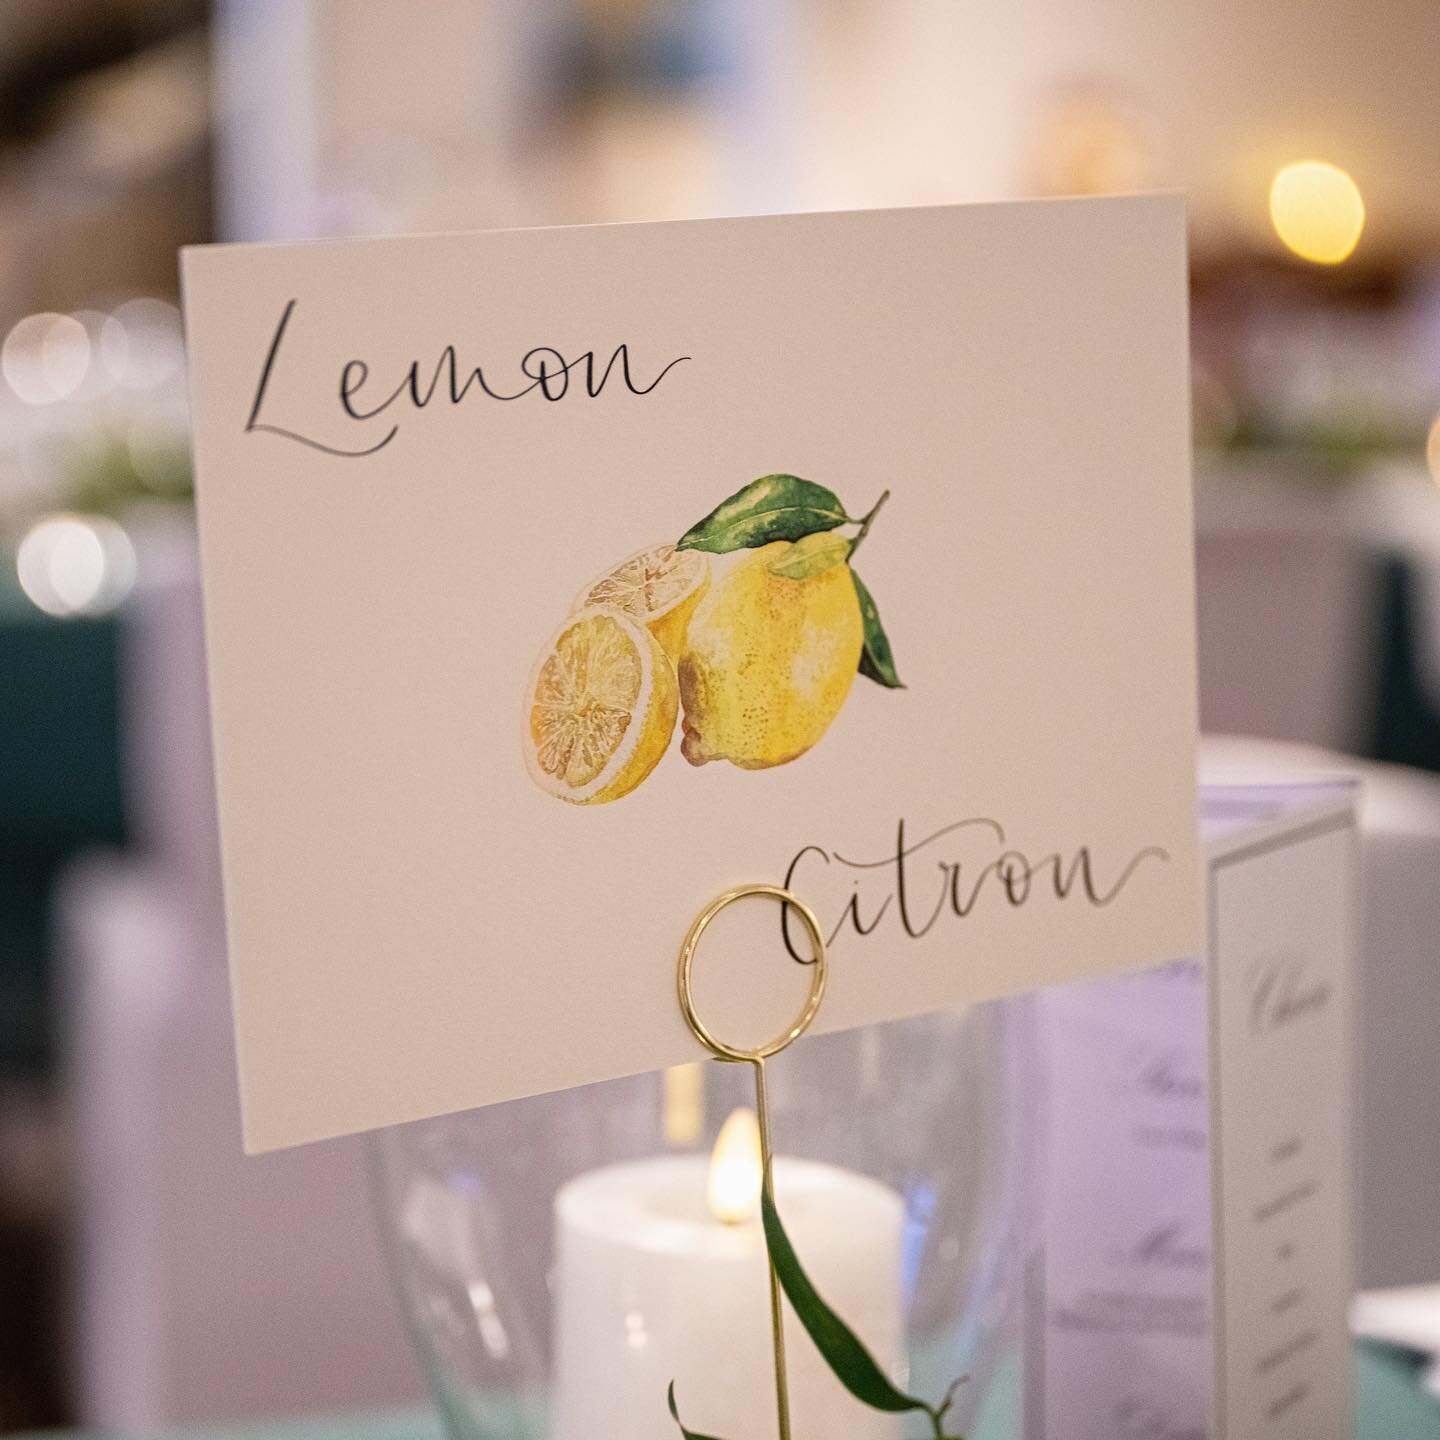 T A B L E  N A M E S 🍋 loved making these English/Swedish table names for the most incredible autumn wedding in Stockholm last year. Beautifully illustrated yet again by the amazing @theputneypainter 
&bull;
&bull;
&bull;
#weddingstationer #weddings